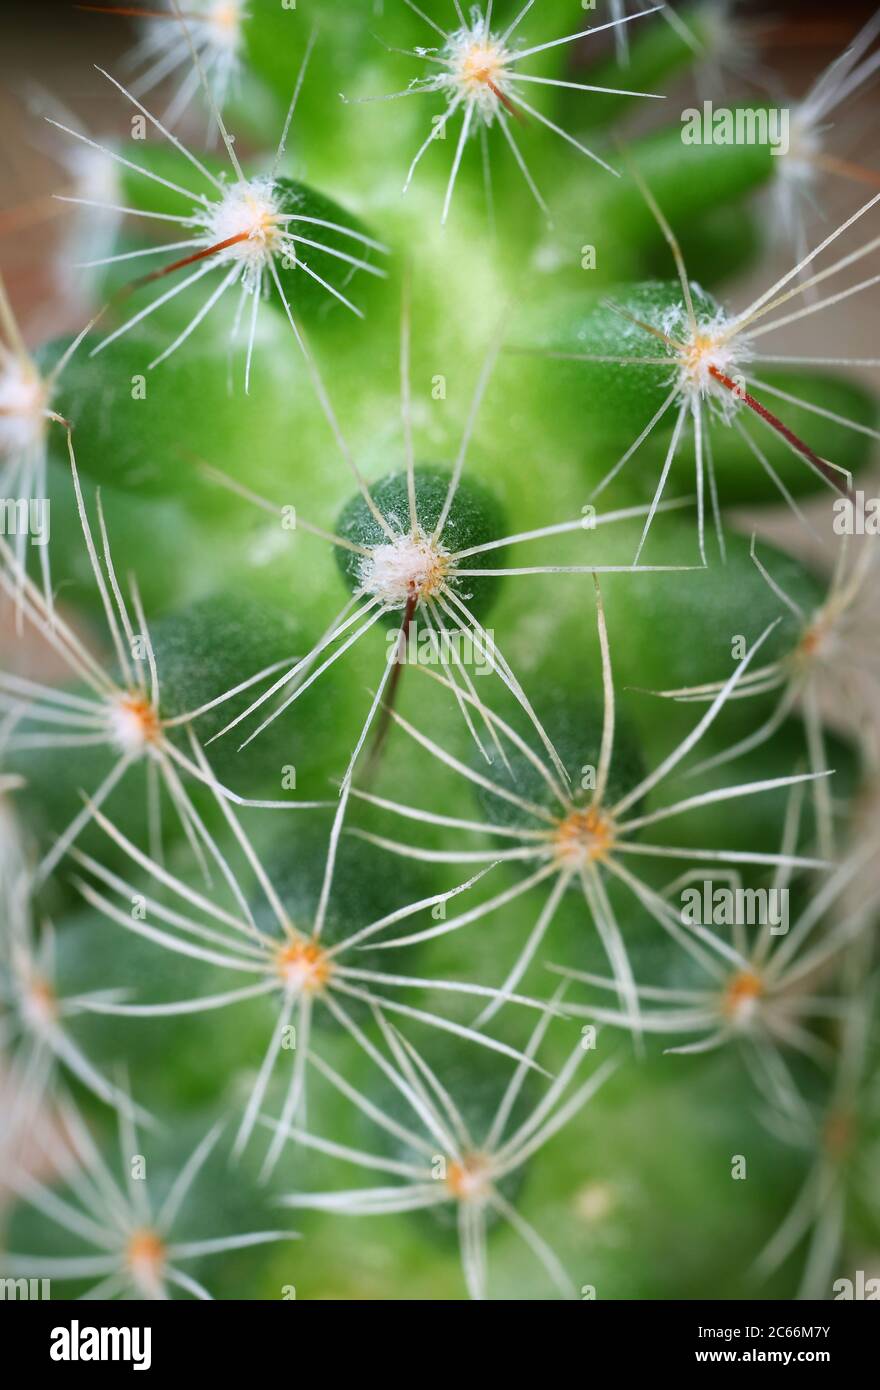 Closeup Amazing Texture of a Thorny Ladyfinger Cactus plant for Background Stock Photo